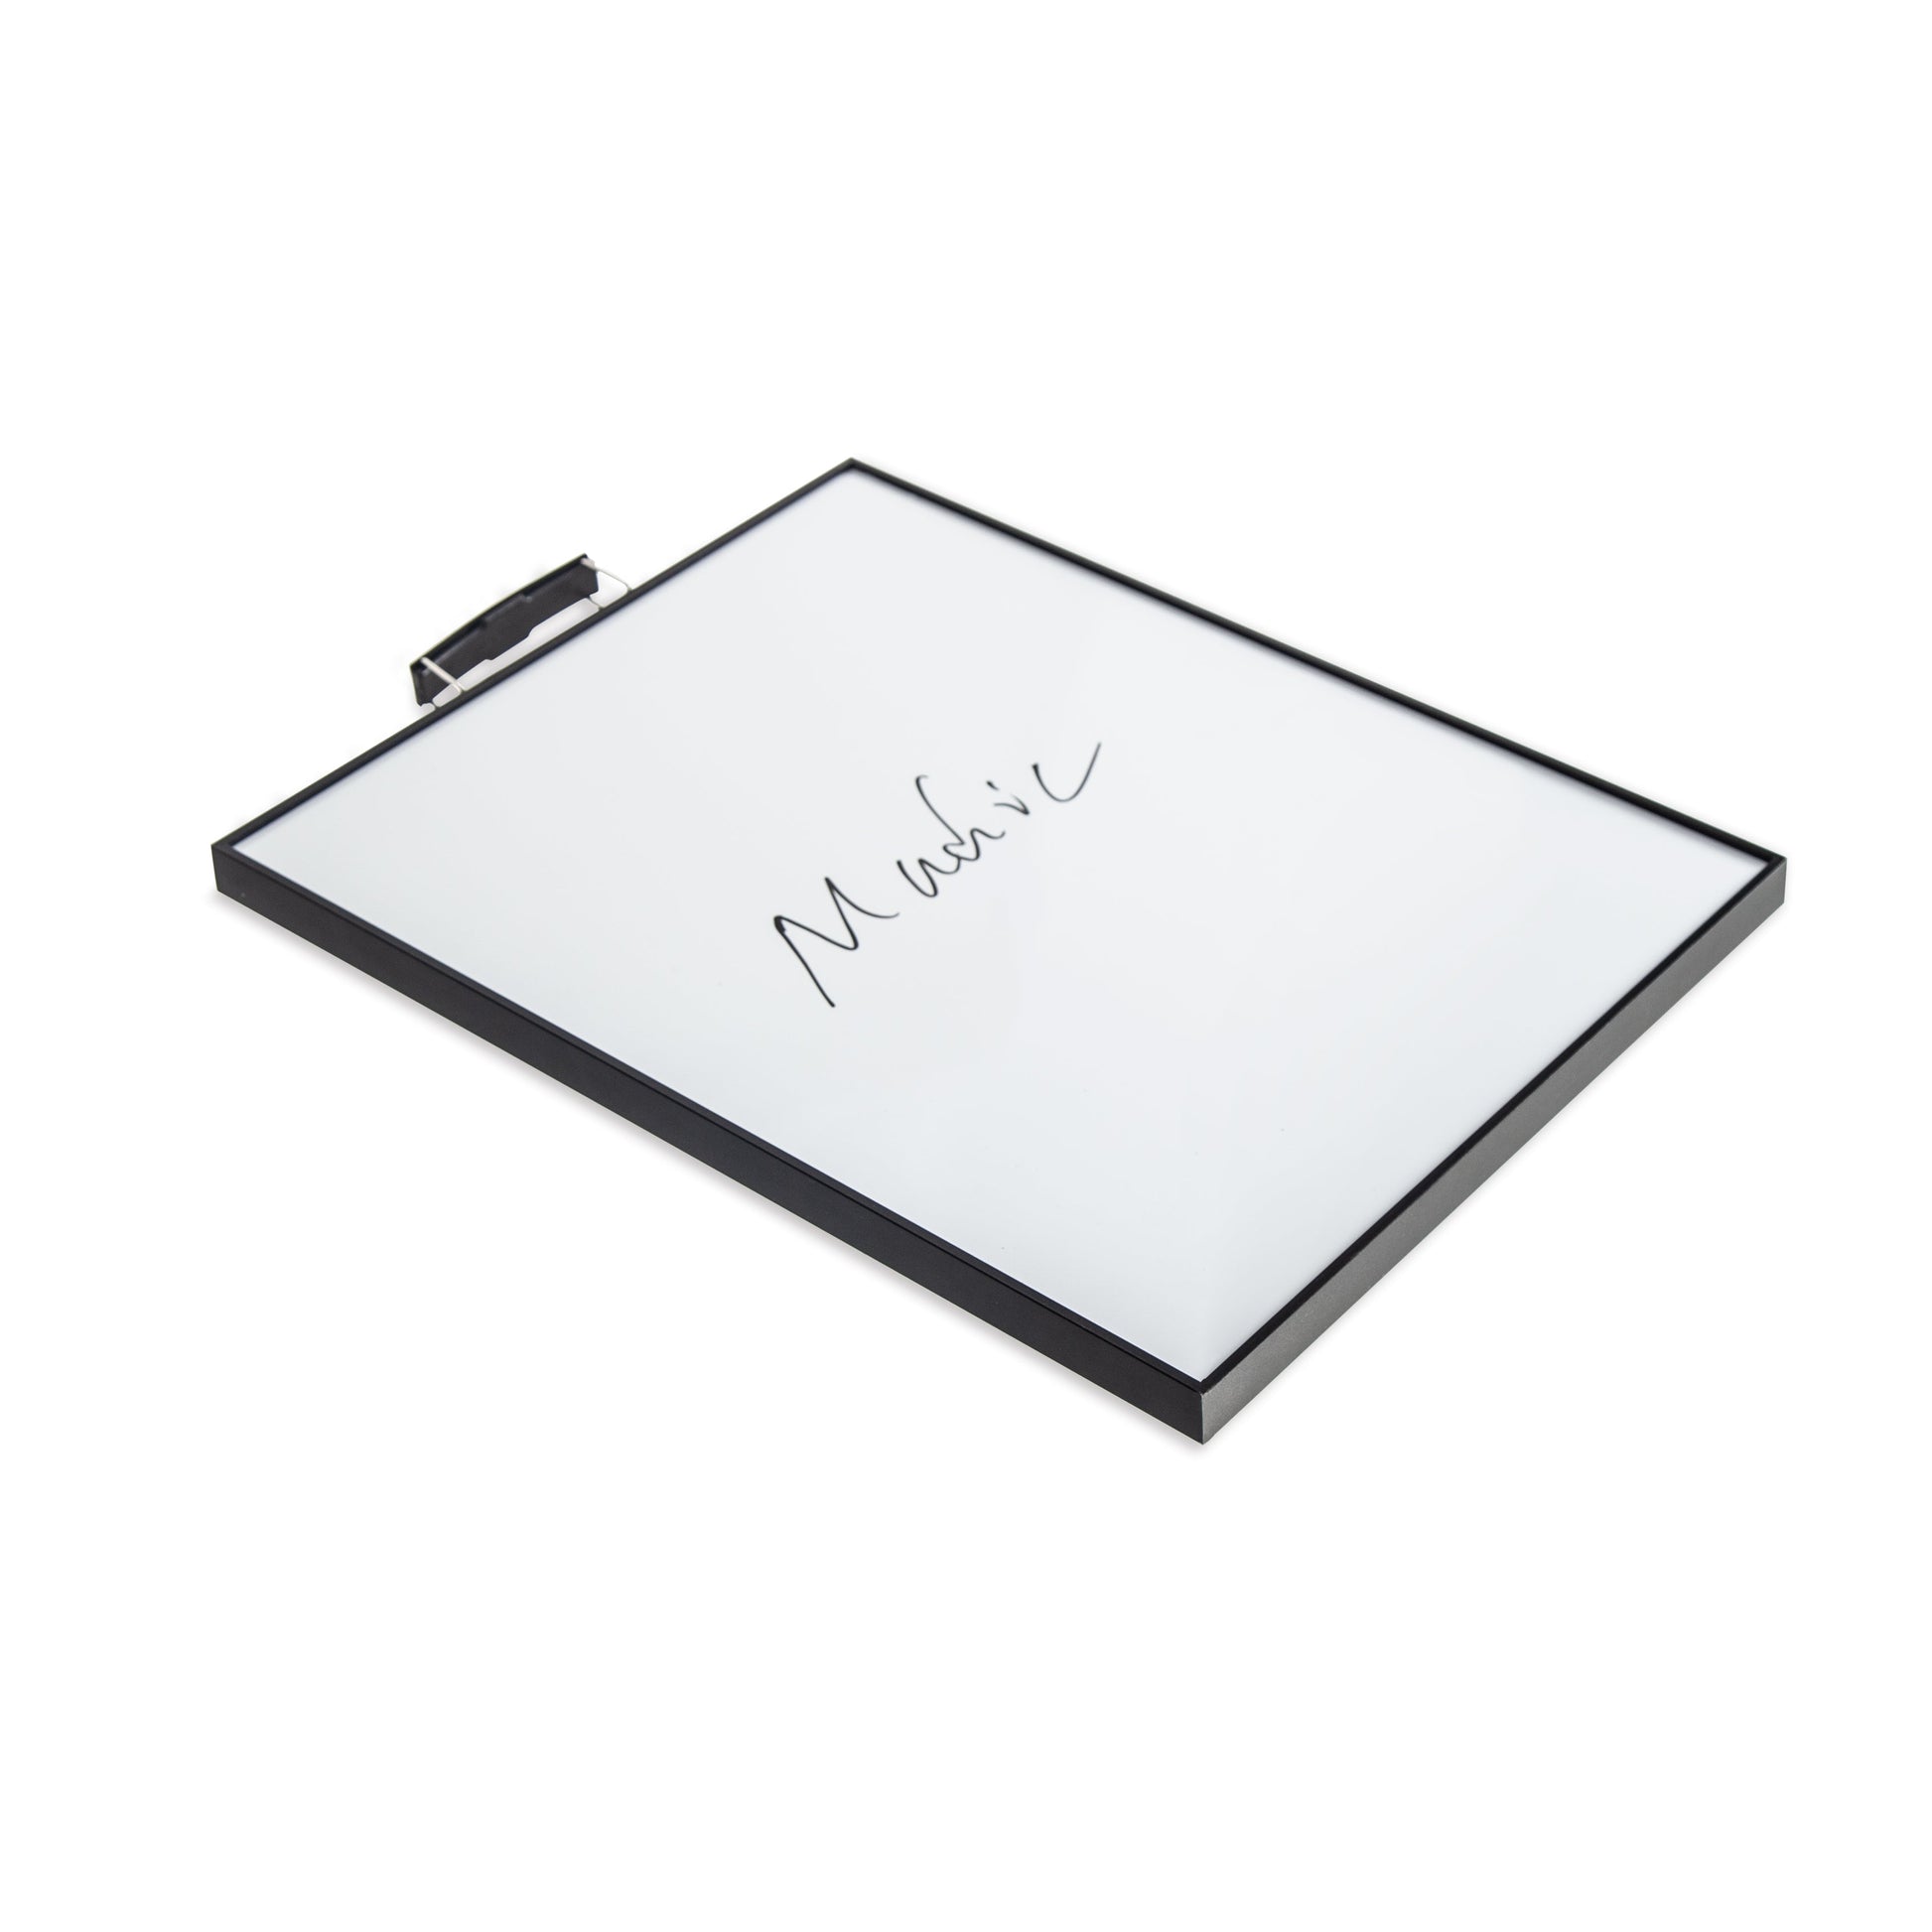 M26 Portable Magnetic Dry Erase Whiteboard, Aluminum Narrow Bezel Magnet White Board With Handle For Kids - Premium magnetic whiteboard from Madic Whiteboard - Madic Whiteboard